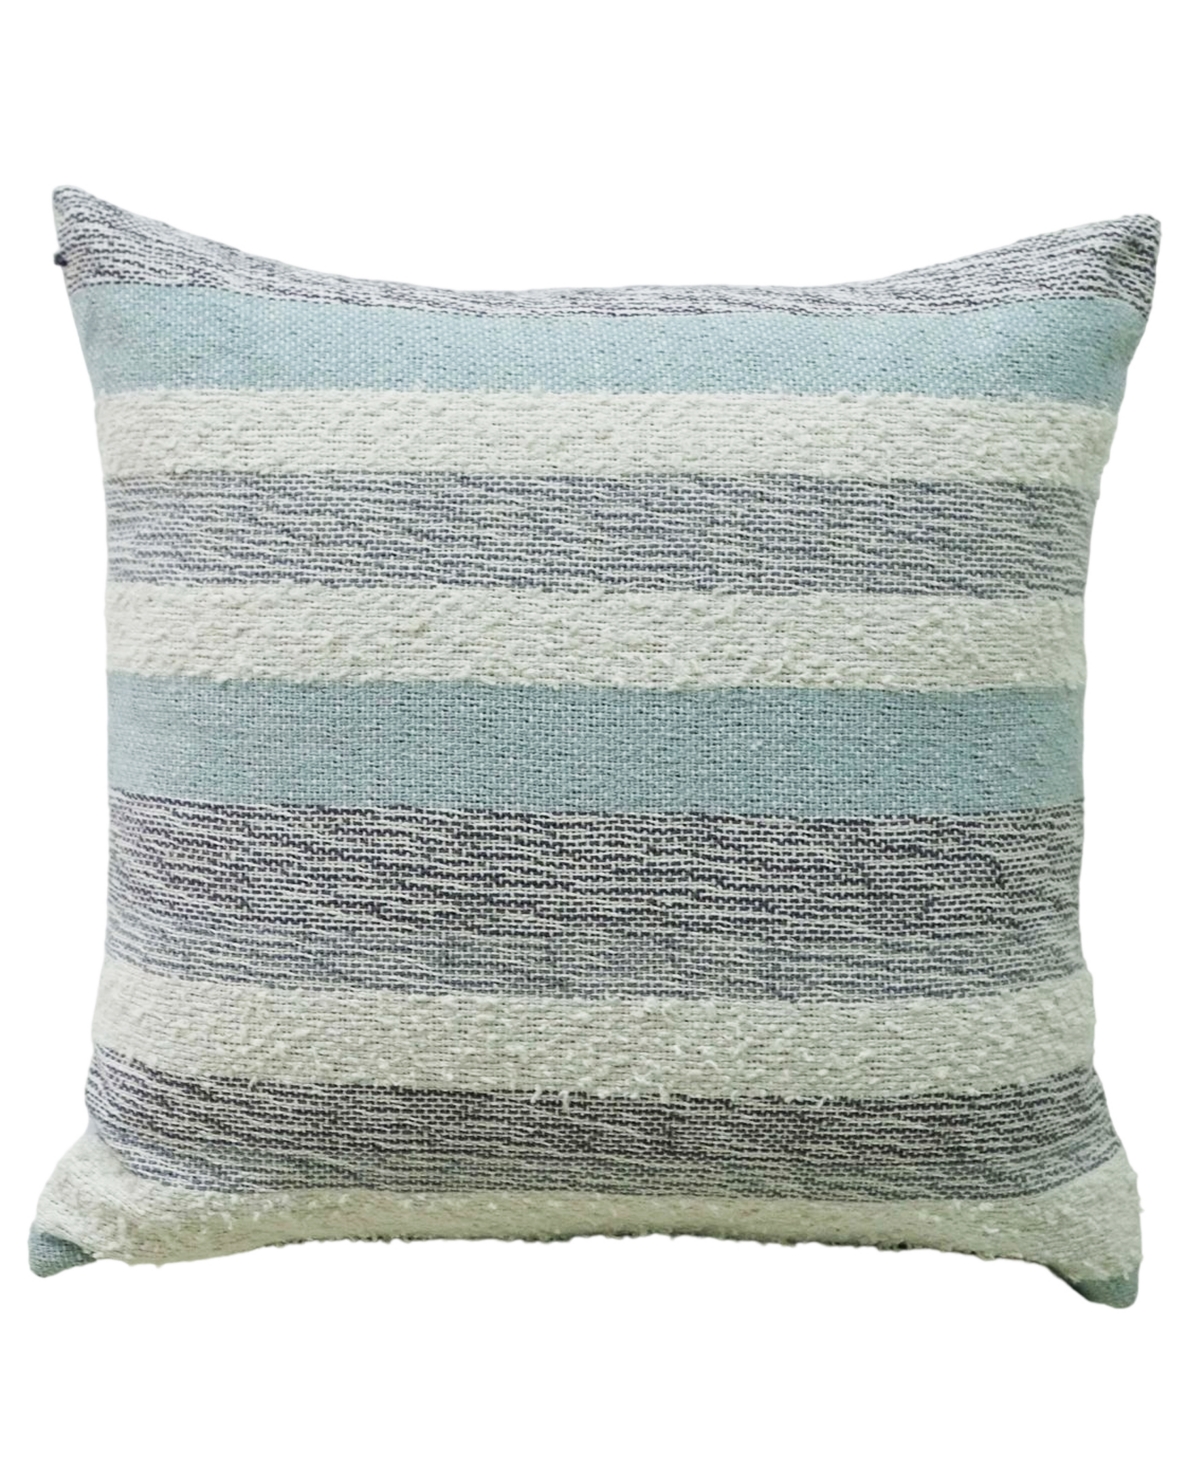 Vibhsa Linden Street Handwoven Textured Stripe Decorative Pillow, 20" X 20" In Multi Color